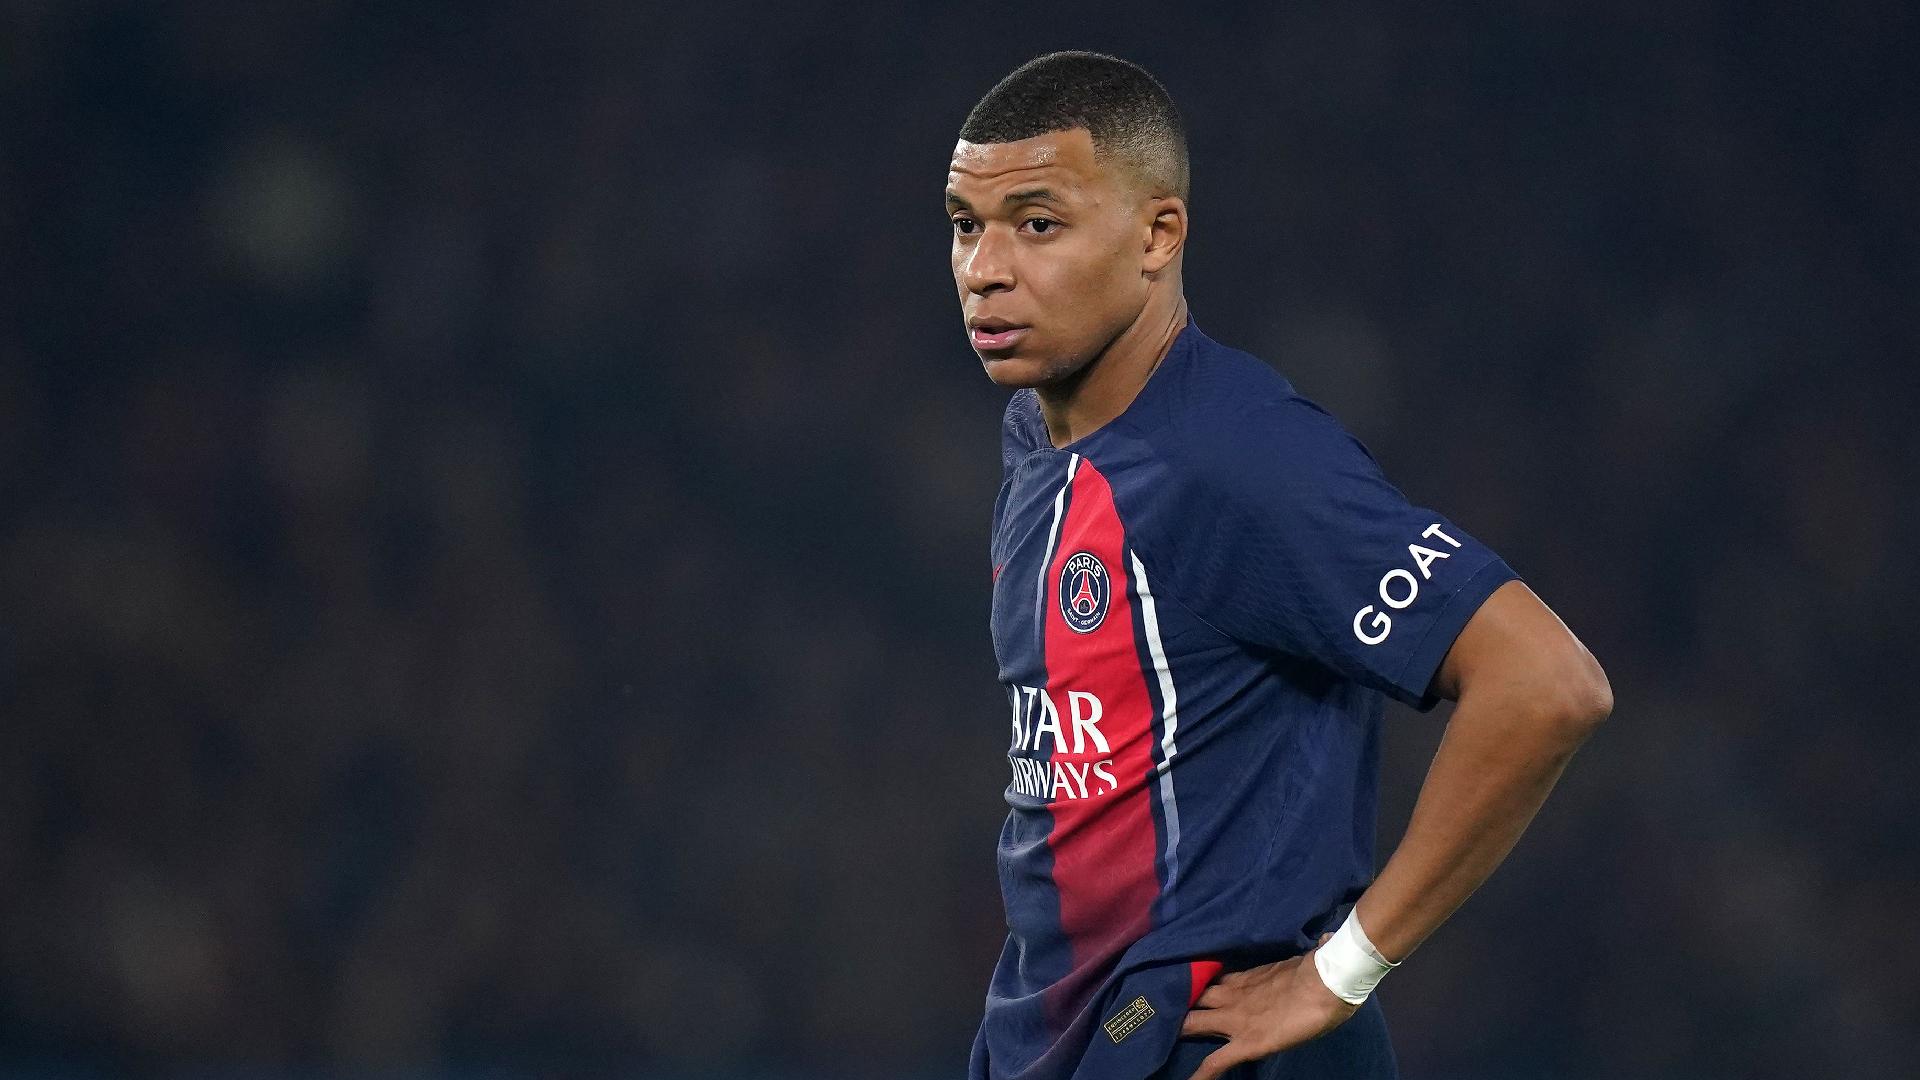 Scheduling problems means Kylian Mbappe’s unveiling as a Real Madrid player will be delayed